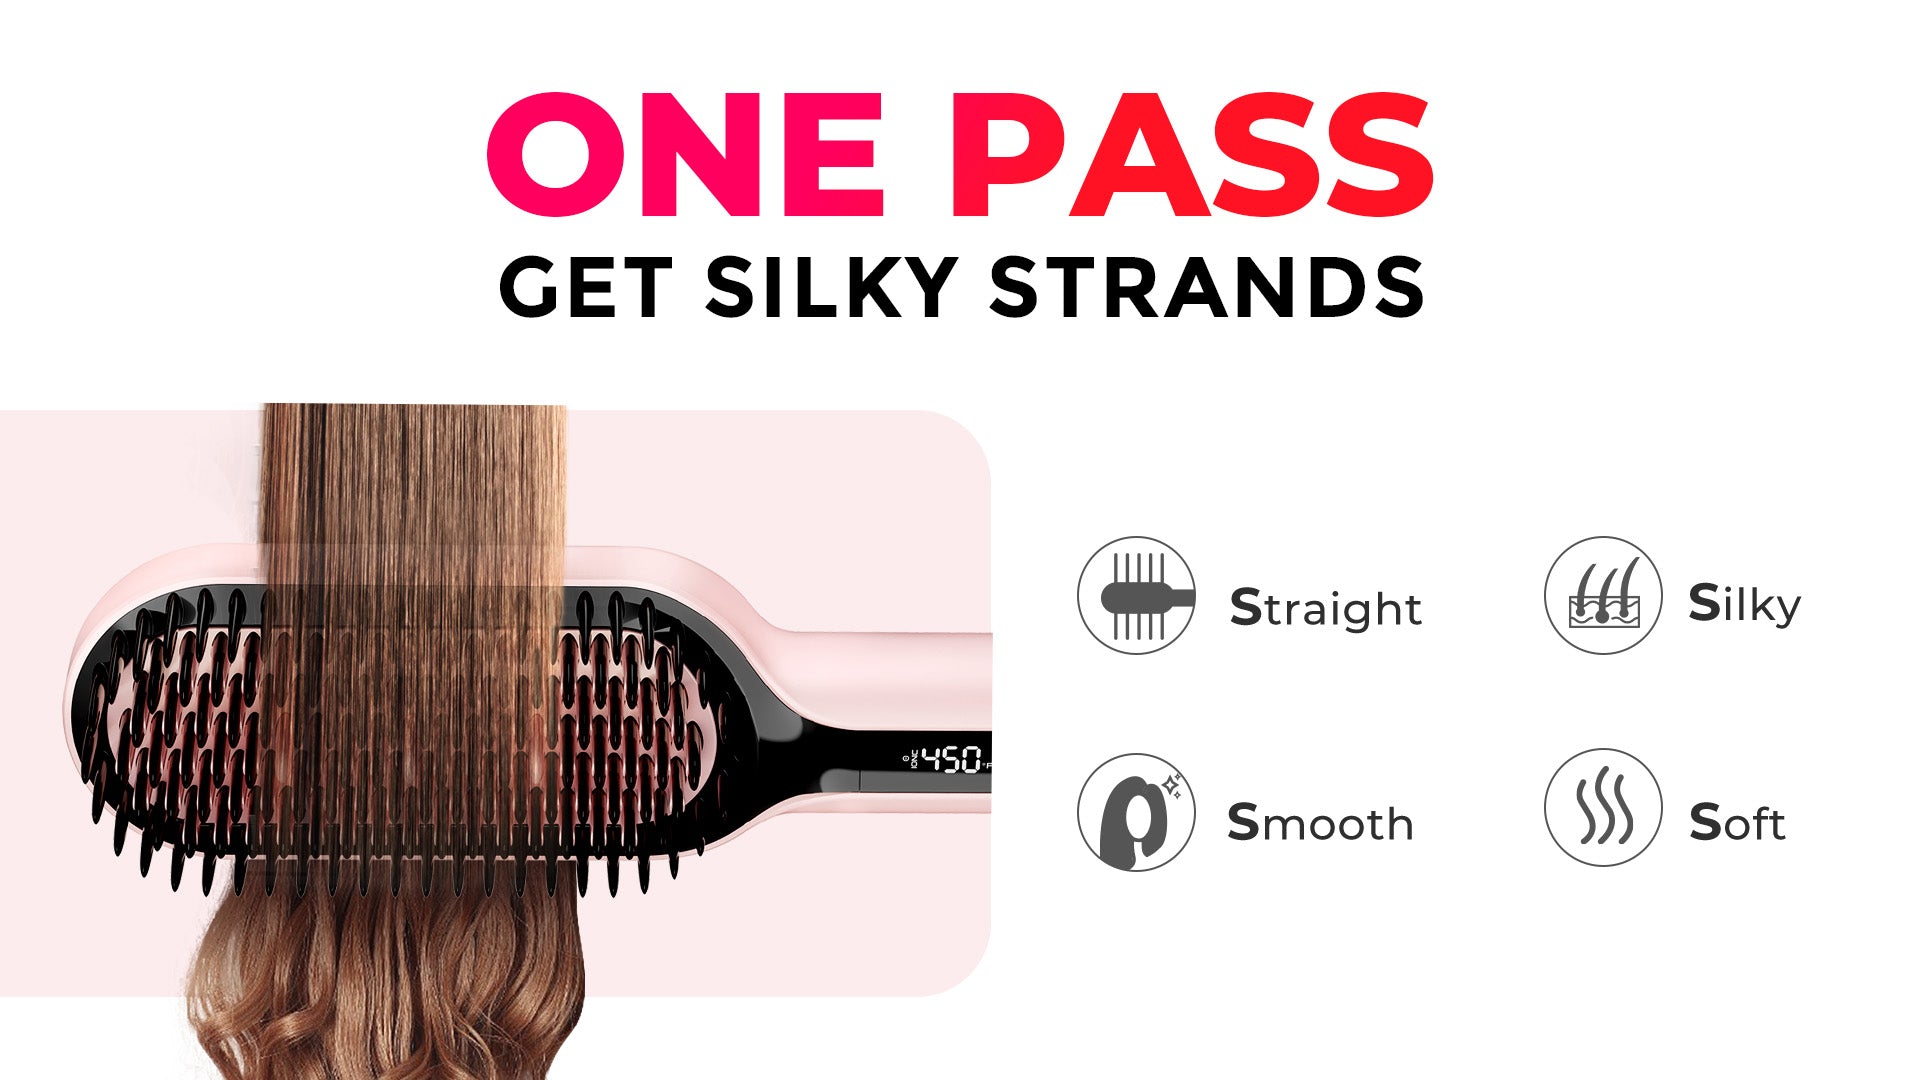 One Pass Get Silky Strands